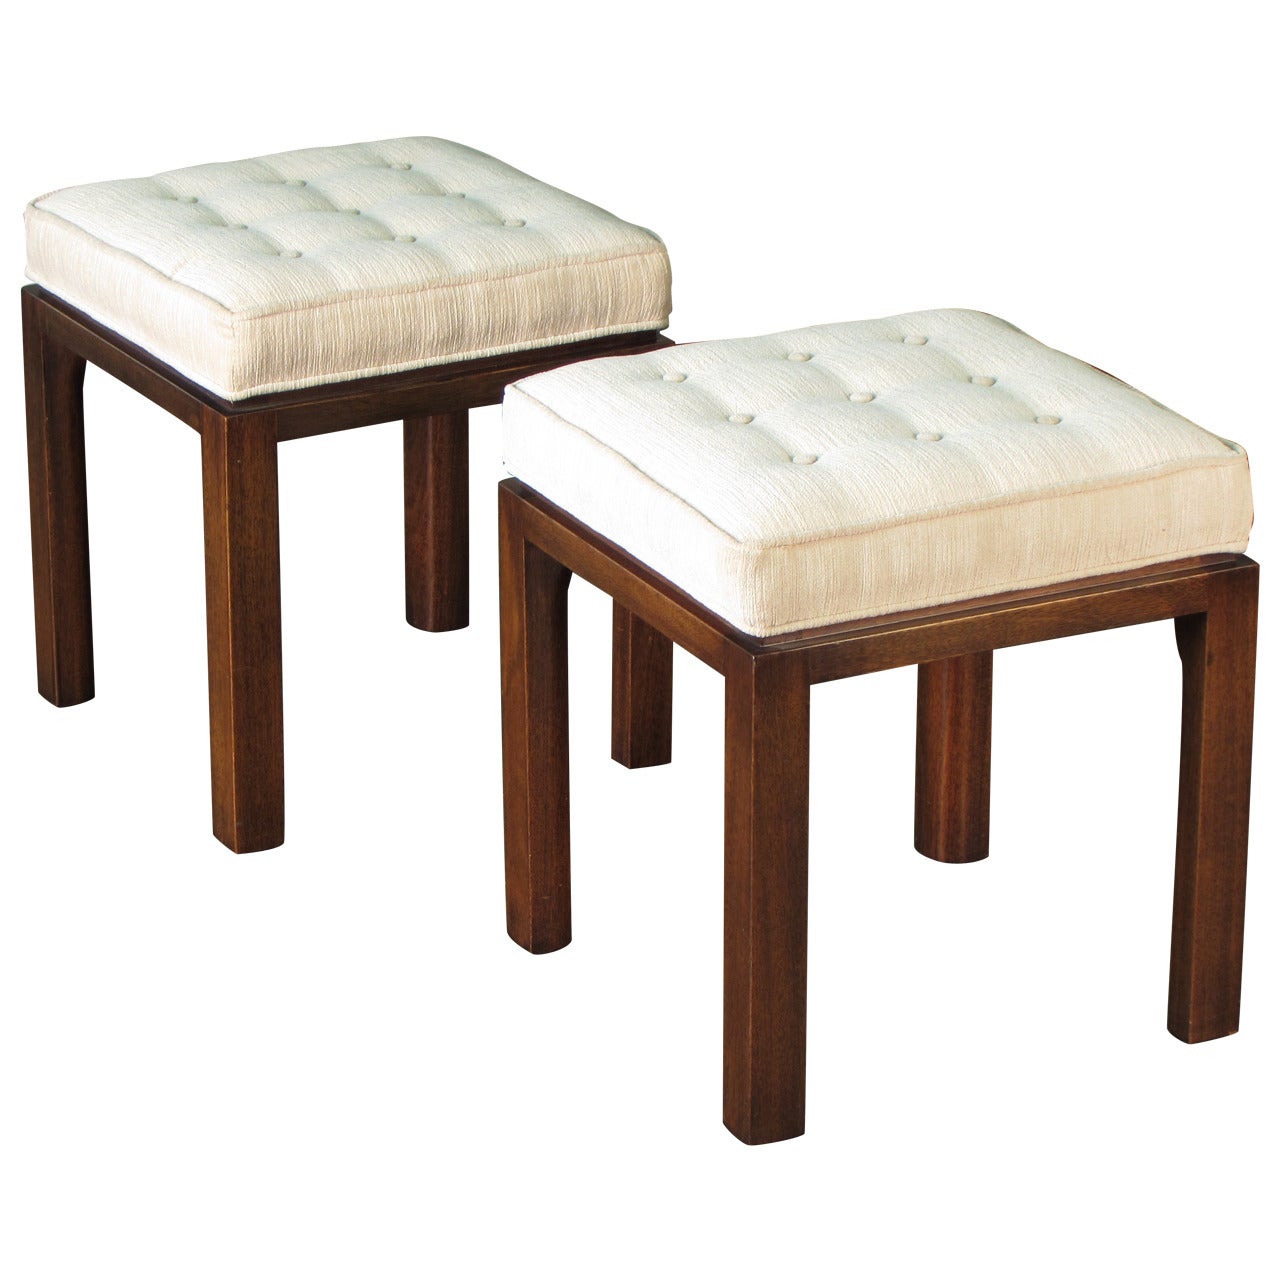 Stately Pair of Signed Upholstered Stools or Benches by Harvey Probber, 1965